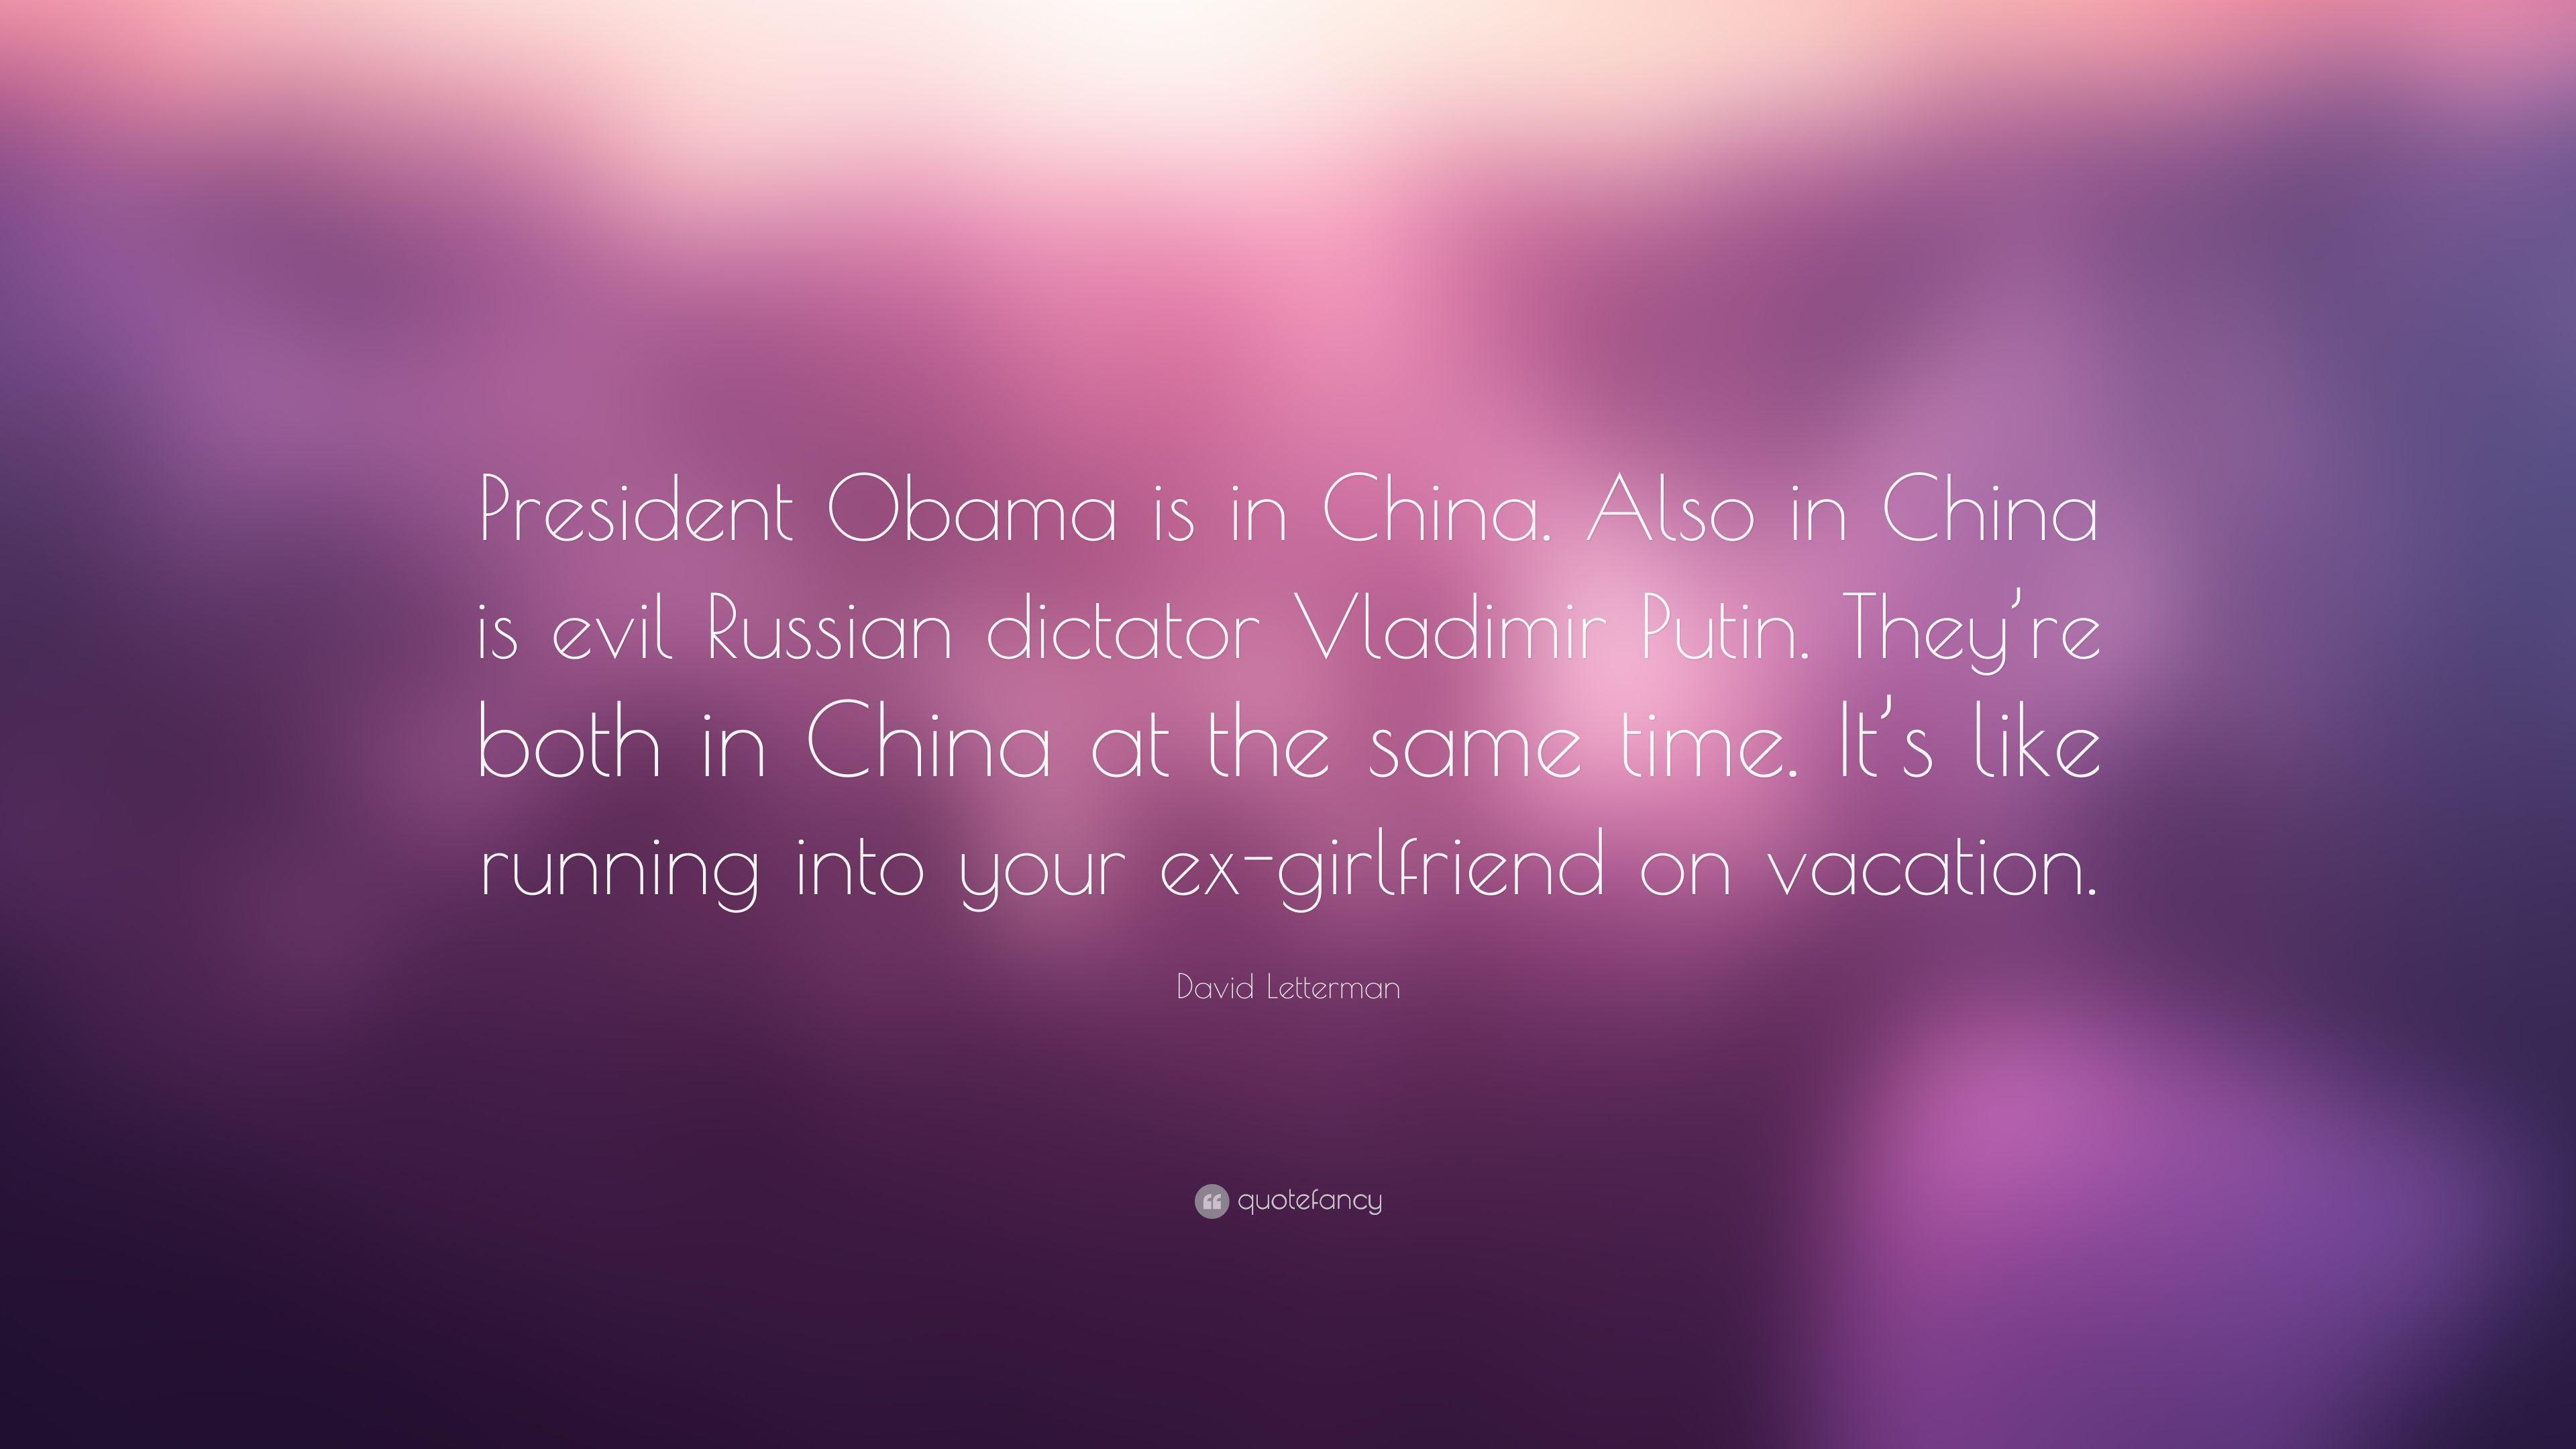 David Letterman Quote: “President Obama is in China. Also in China